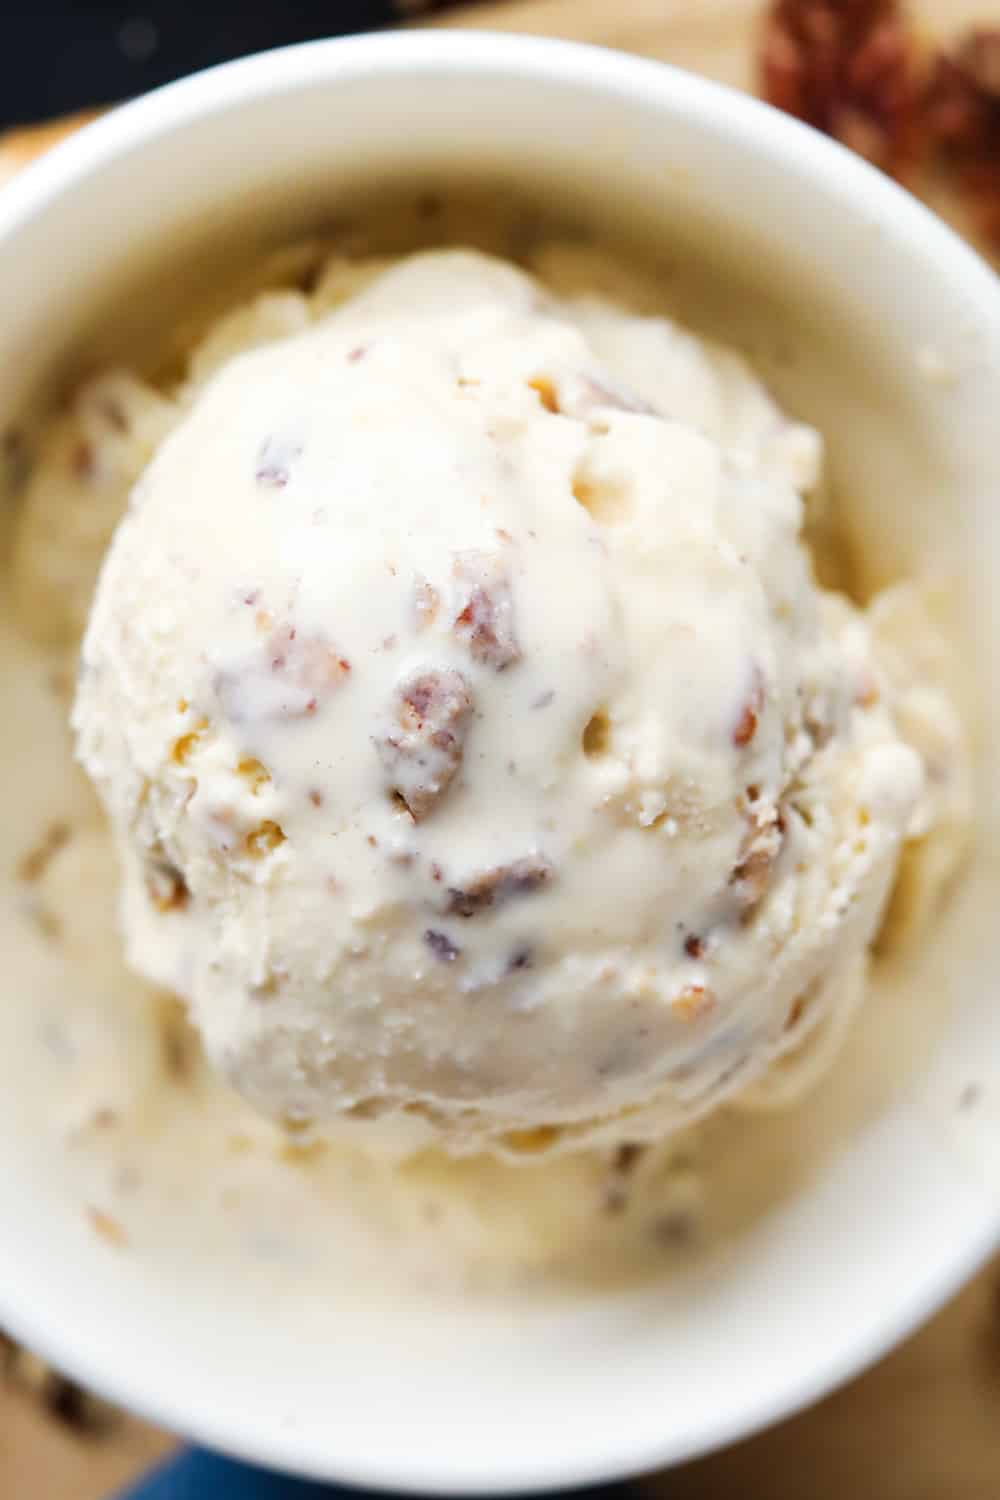 A scoop of ice cream in a white bowl.